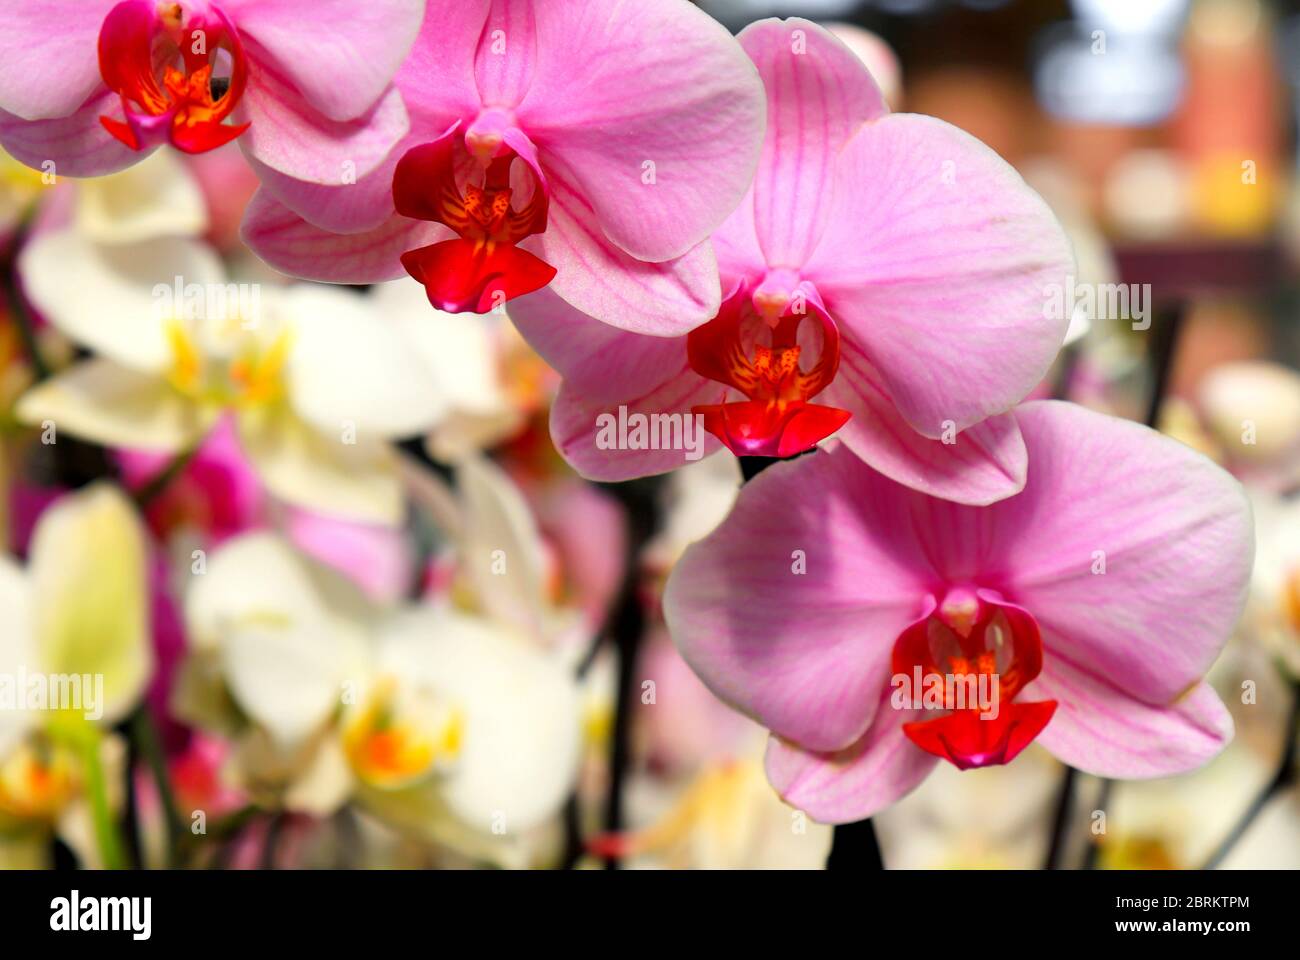 Phalaenopsis Orchid pink flowers in the store. Potted orchidea. Many flowering plants, nature floral background. Beautiful flowers at greenhouse. Stock Photo